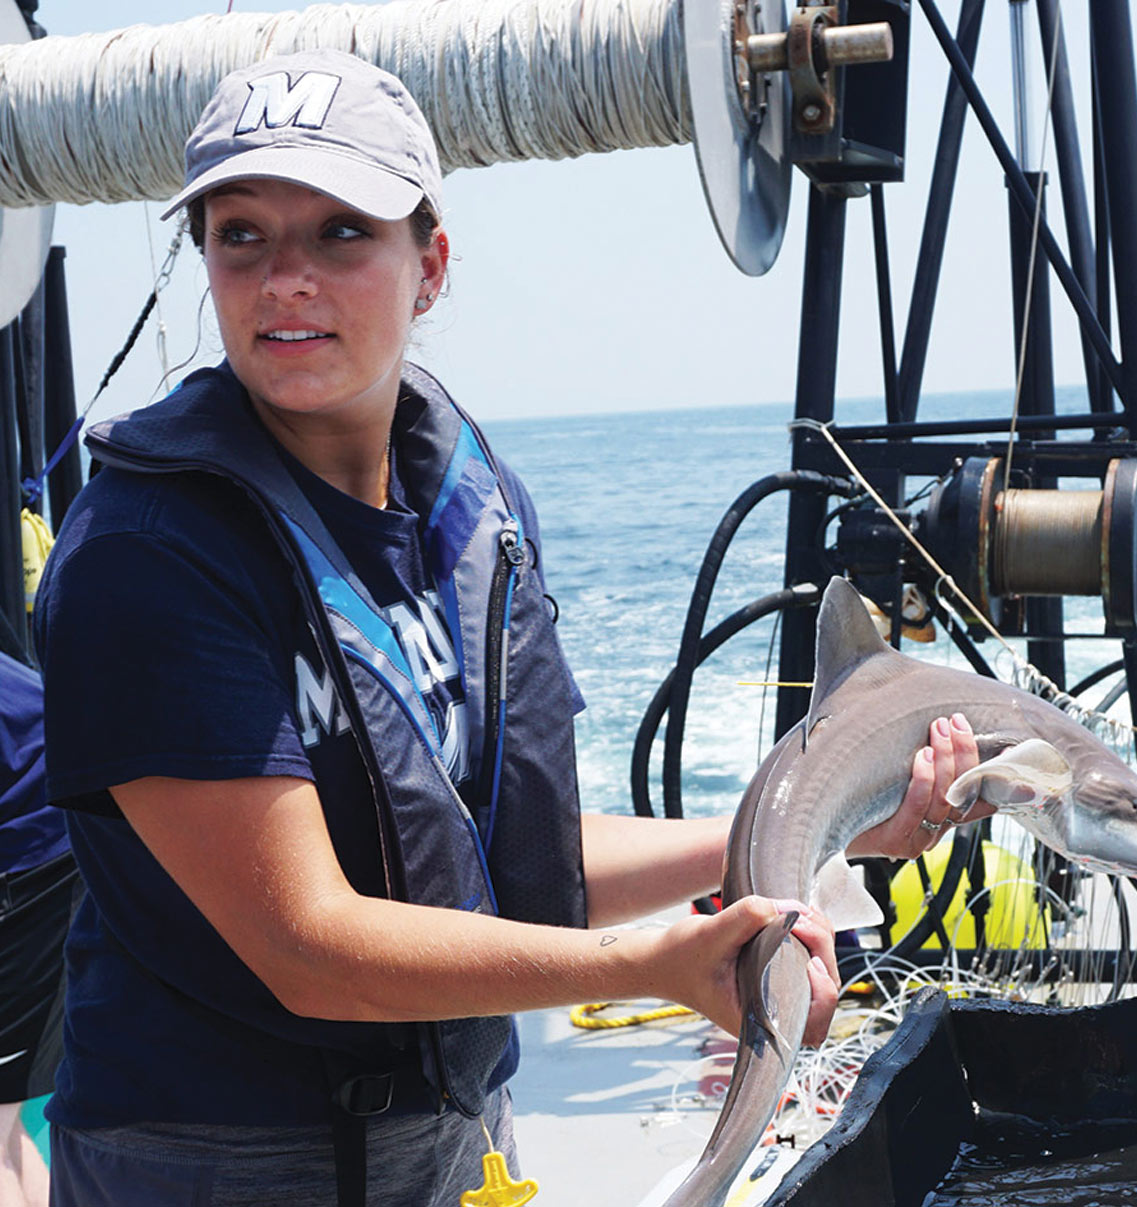 A photograph of a girl participating in a shark tagging activity nearby two other individuals